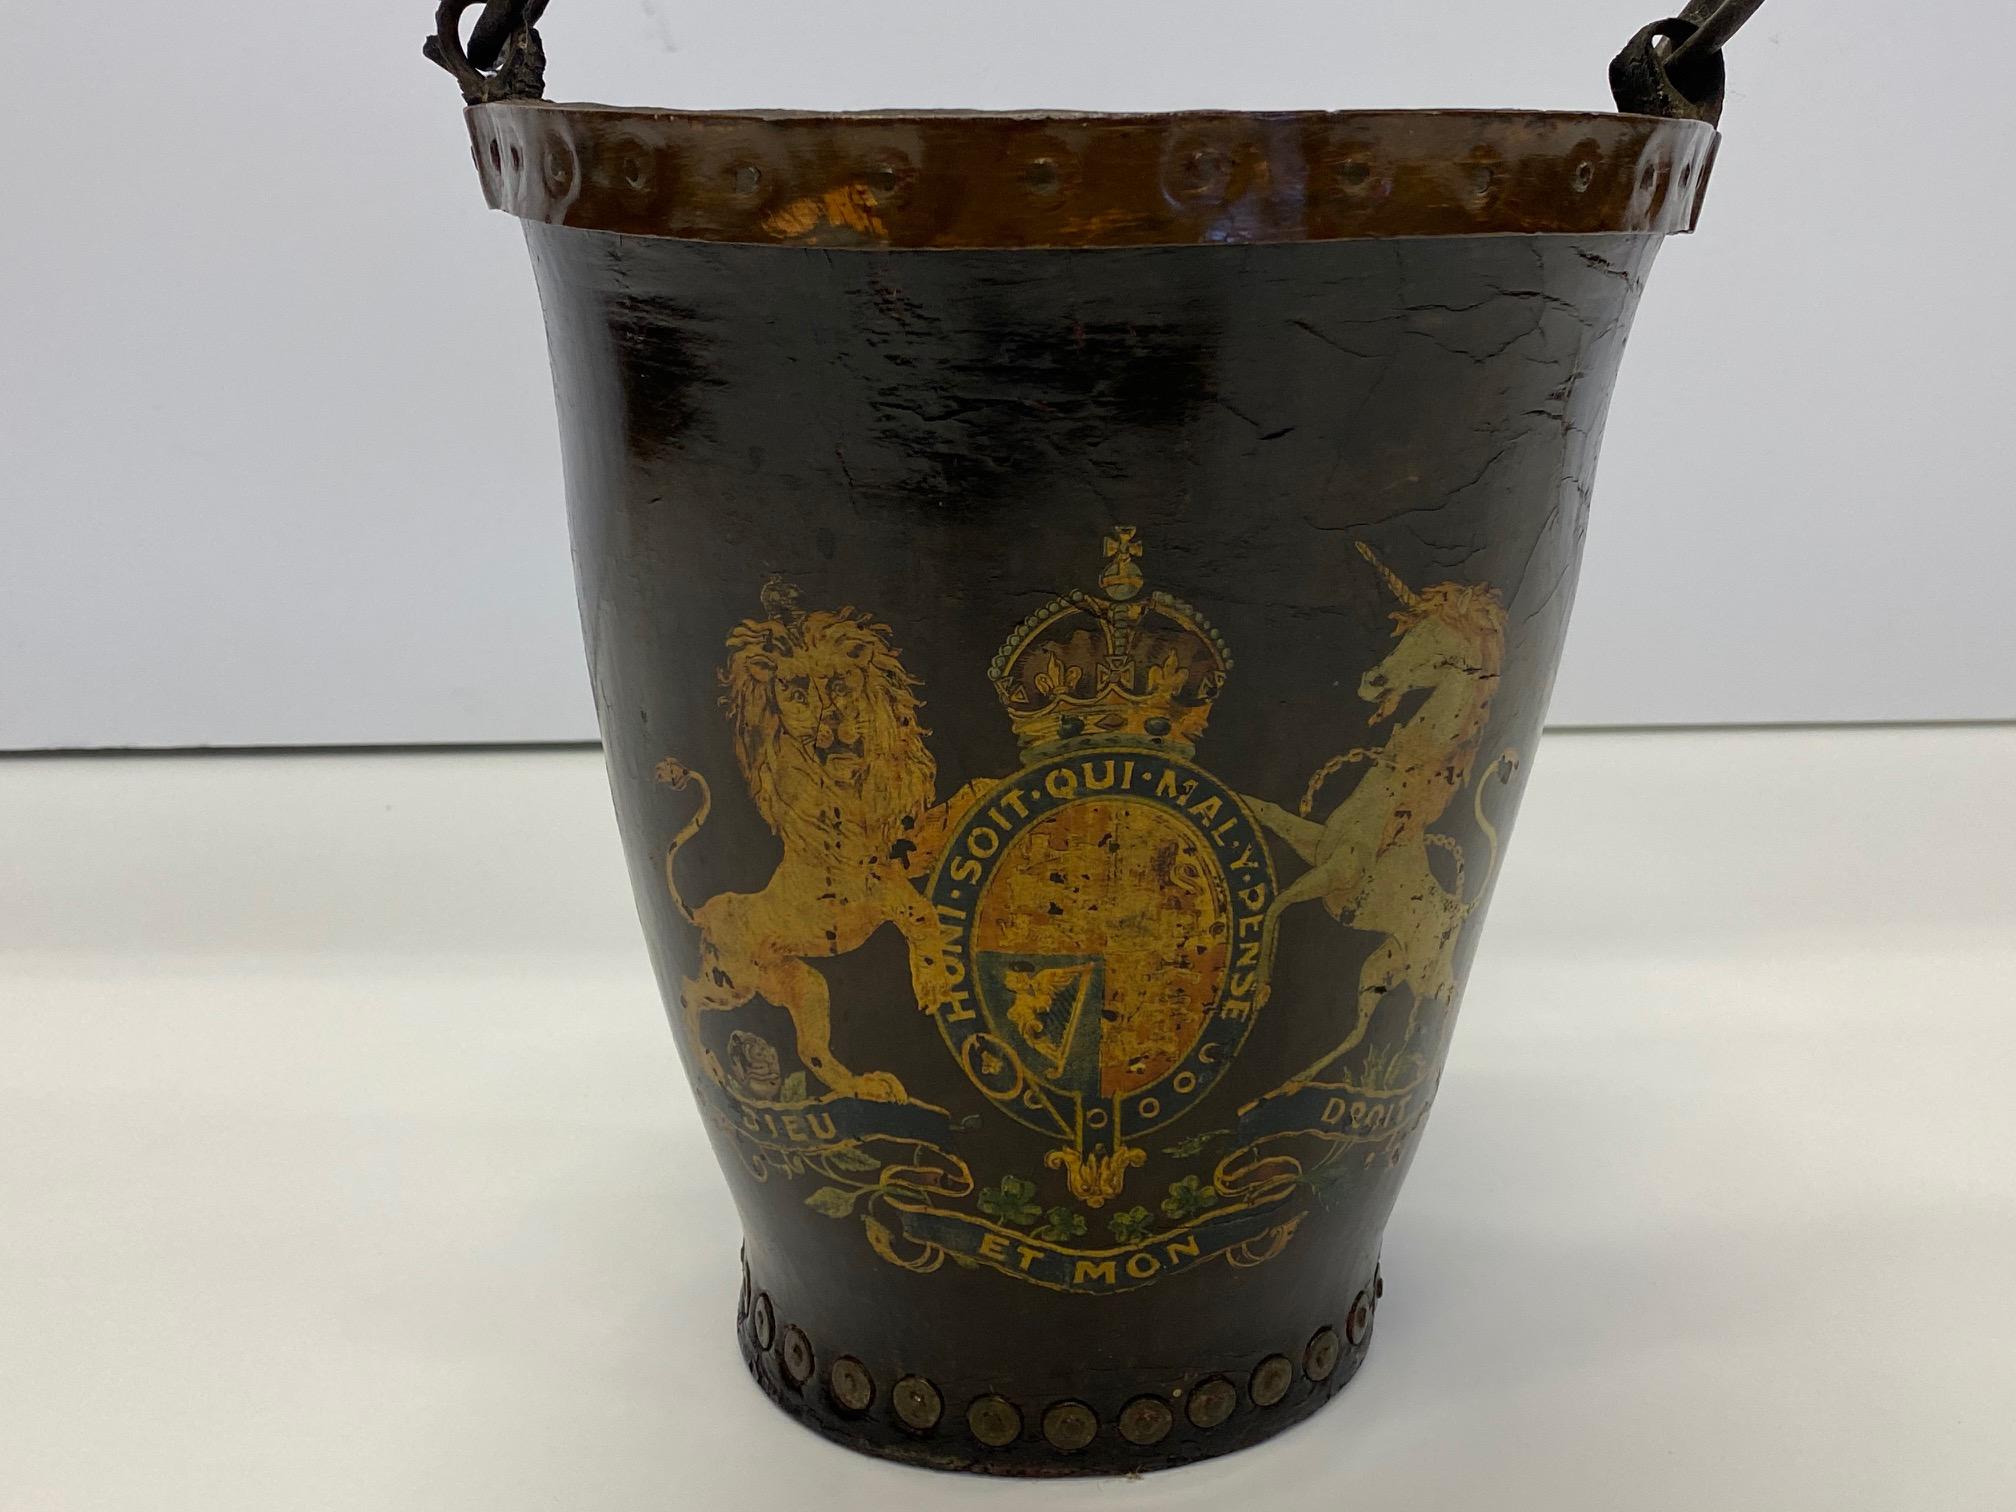 A fabulous character rich early English fire bucket, hand painted with regal crest of two horses and oval medallion with crown. Original leather handle.